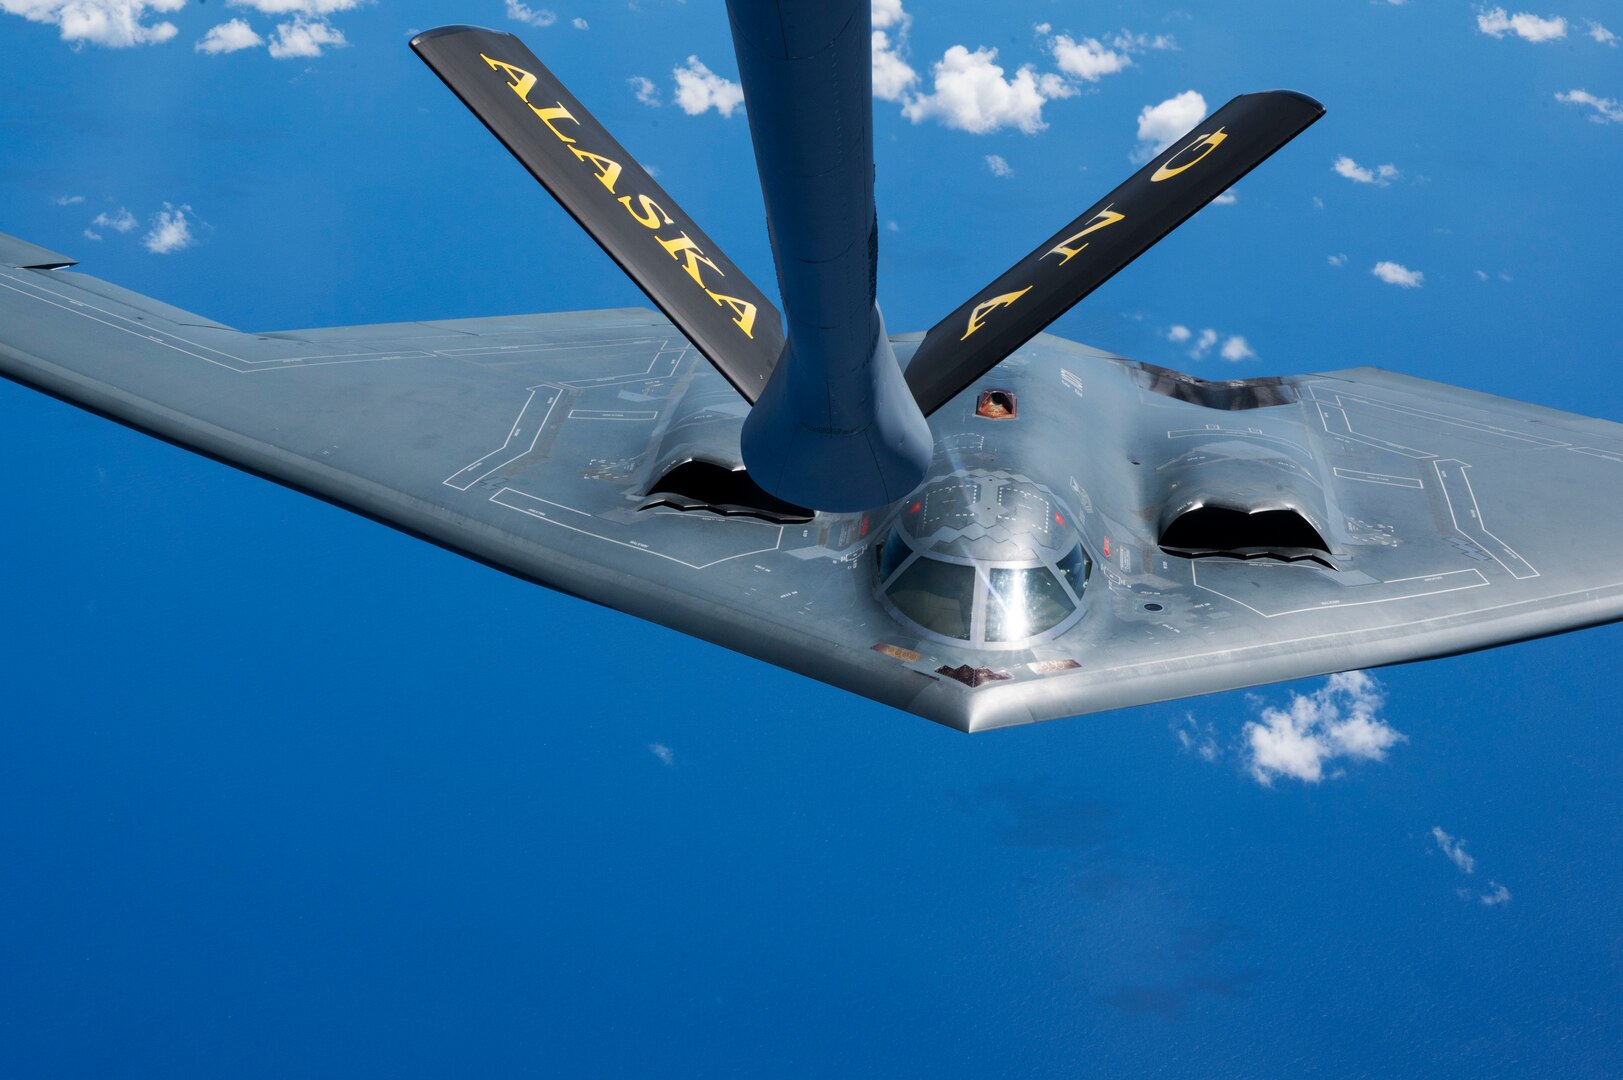 A B-2 Spirit from Whiteman Air Force Base, Missouri, prepares to conduct aerial refueling operations with a KC-135 Stratotanker from the Alaska Air National Guard, during a training mission in the Indo-Pacific region, March 23, 2022. Once in Australian airspace, the B-2 crews from the 509th Bomb Wing teamed up with the tanker before integrating with eight fighter aircraft—two RAAF F-35A Lightning IIs, two Royal Australian Air Force EA-18 Growlers, two RAAF Super Hornets and two U.S. Air Force F-16C Aggressors —to conduct training operations. (U.S. Air Force photo by Tech. Sgt. Hailey Haux)